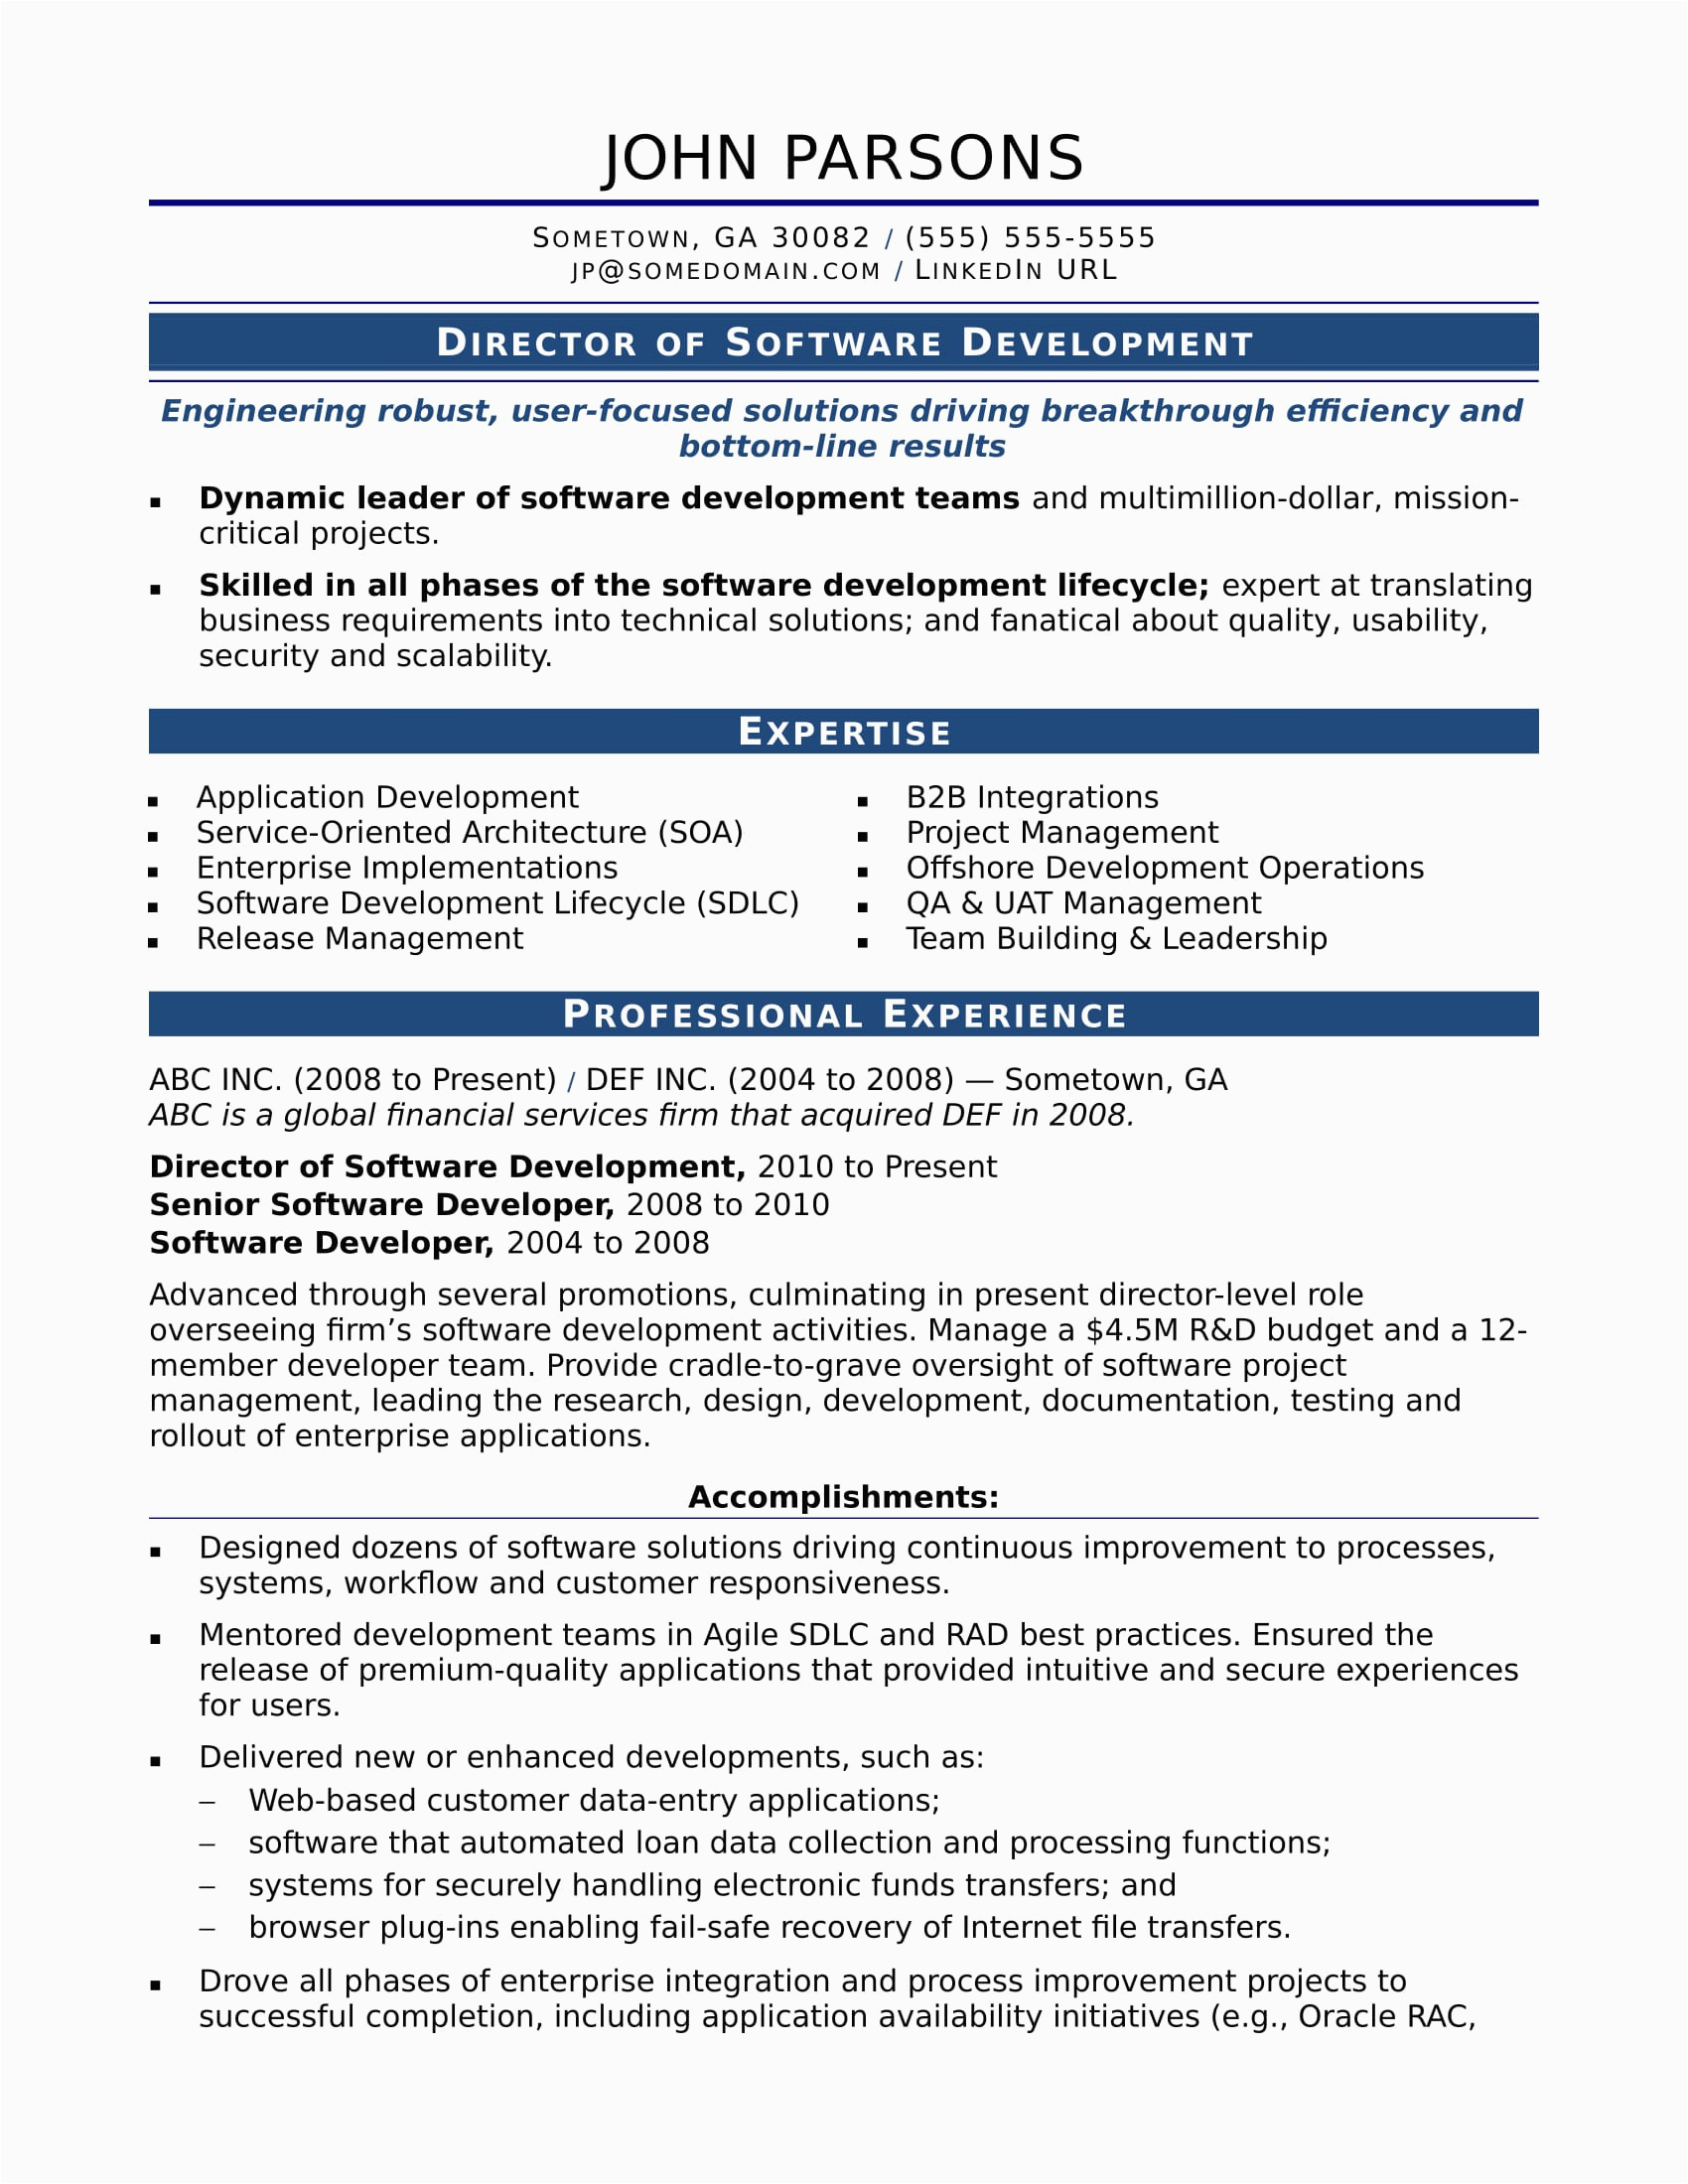 Resume Template for Experienced It Professionals Sample Resume for An Experienced It Developer